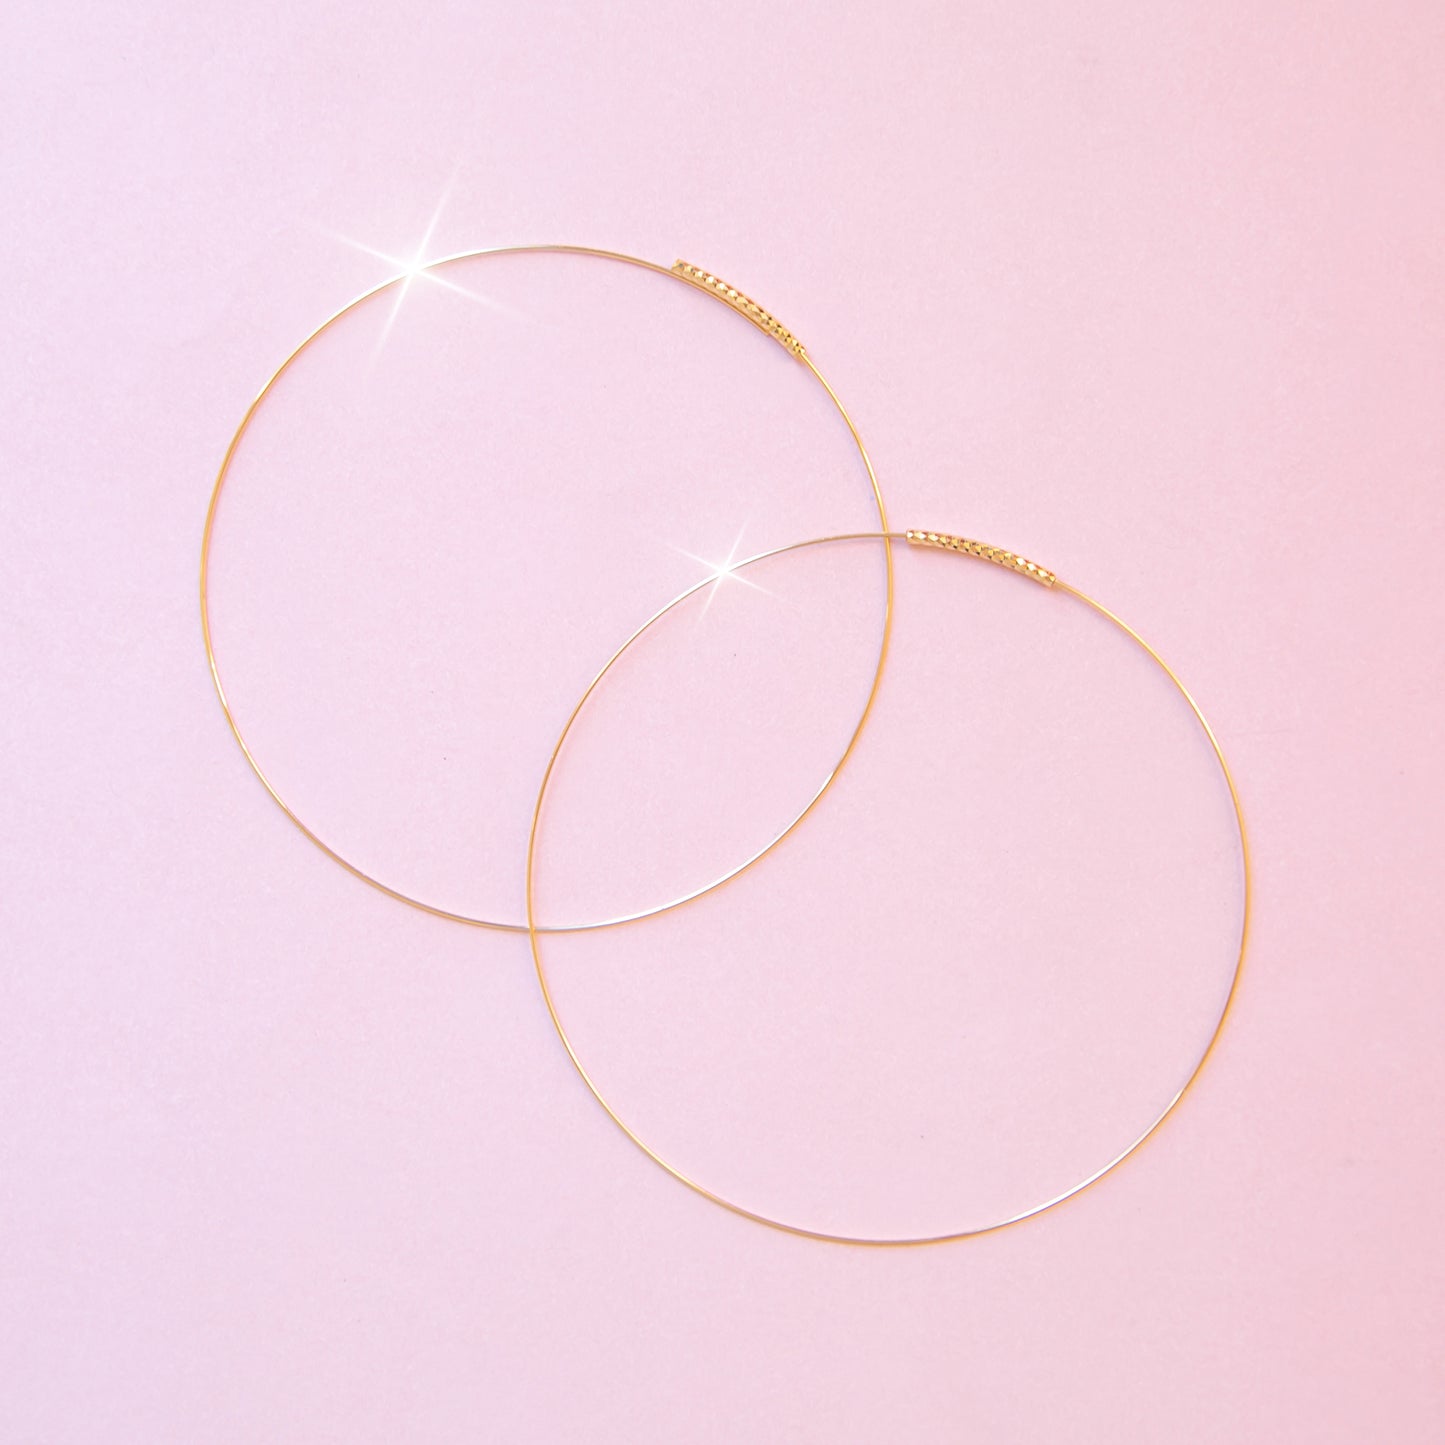 On a pink background is a pair of dainty gold hoop earrings.